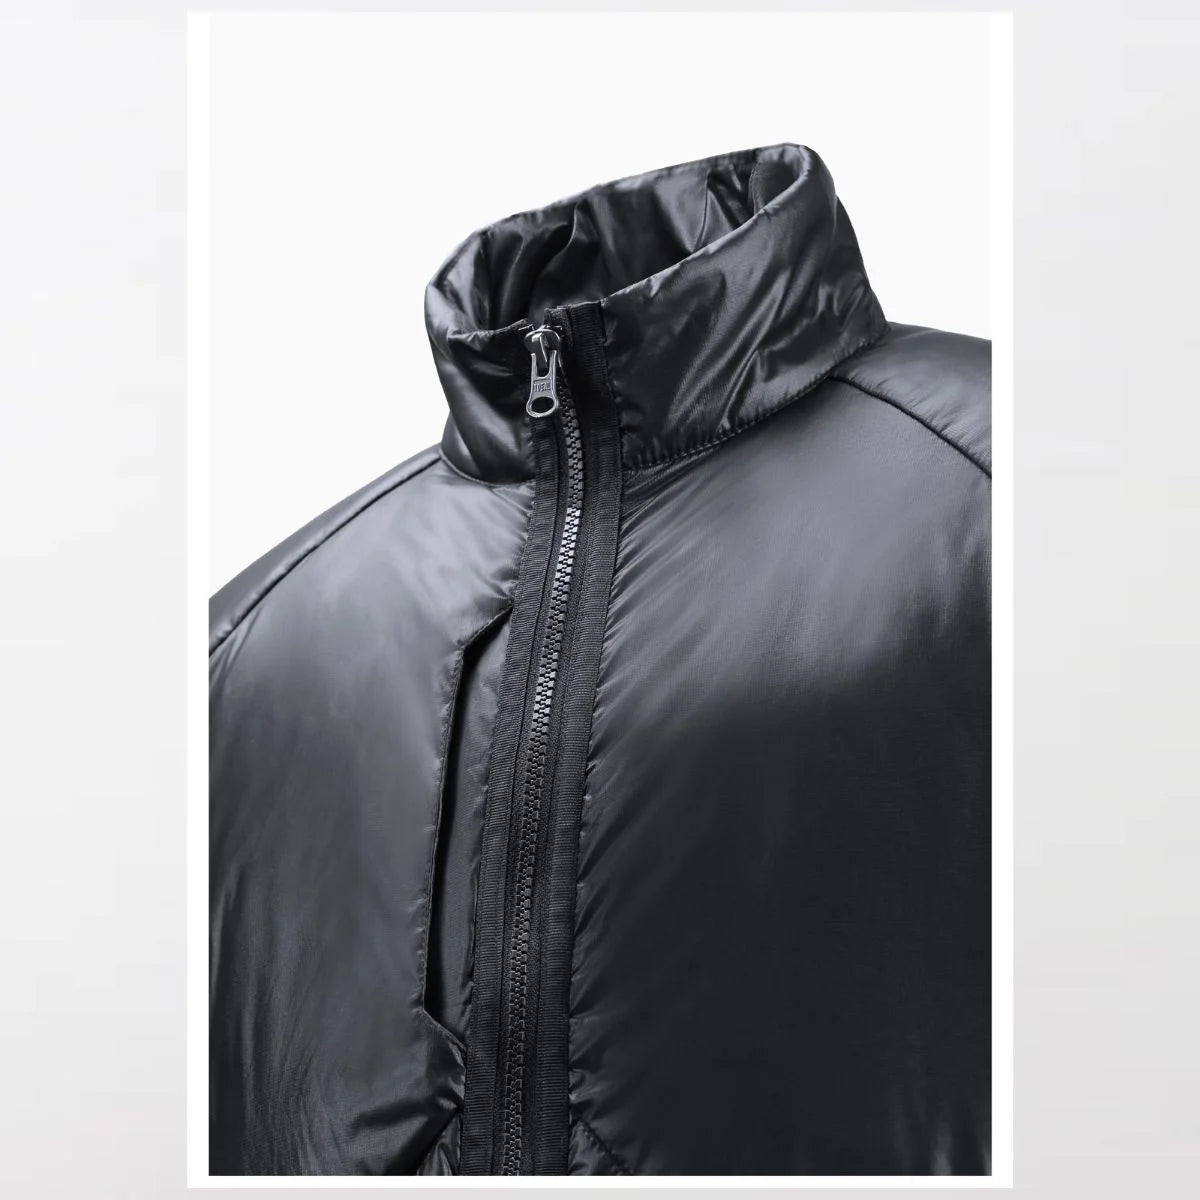 Details of the Black Efficient Insulated Techwear Jacket - Clotechnow